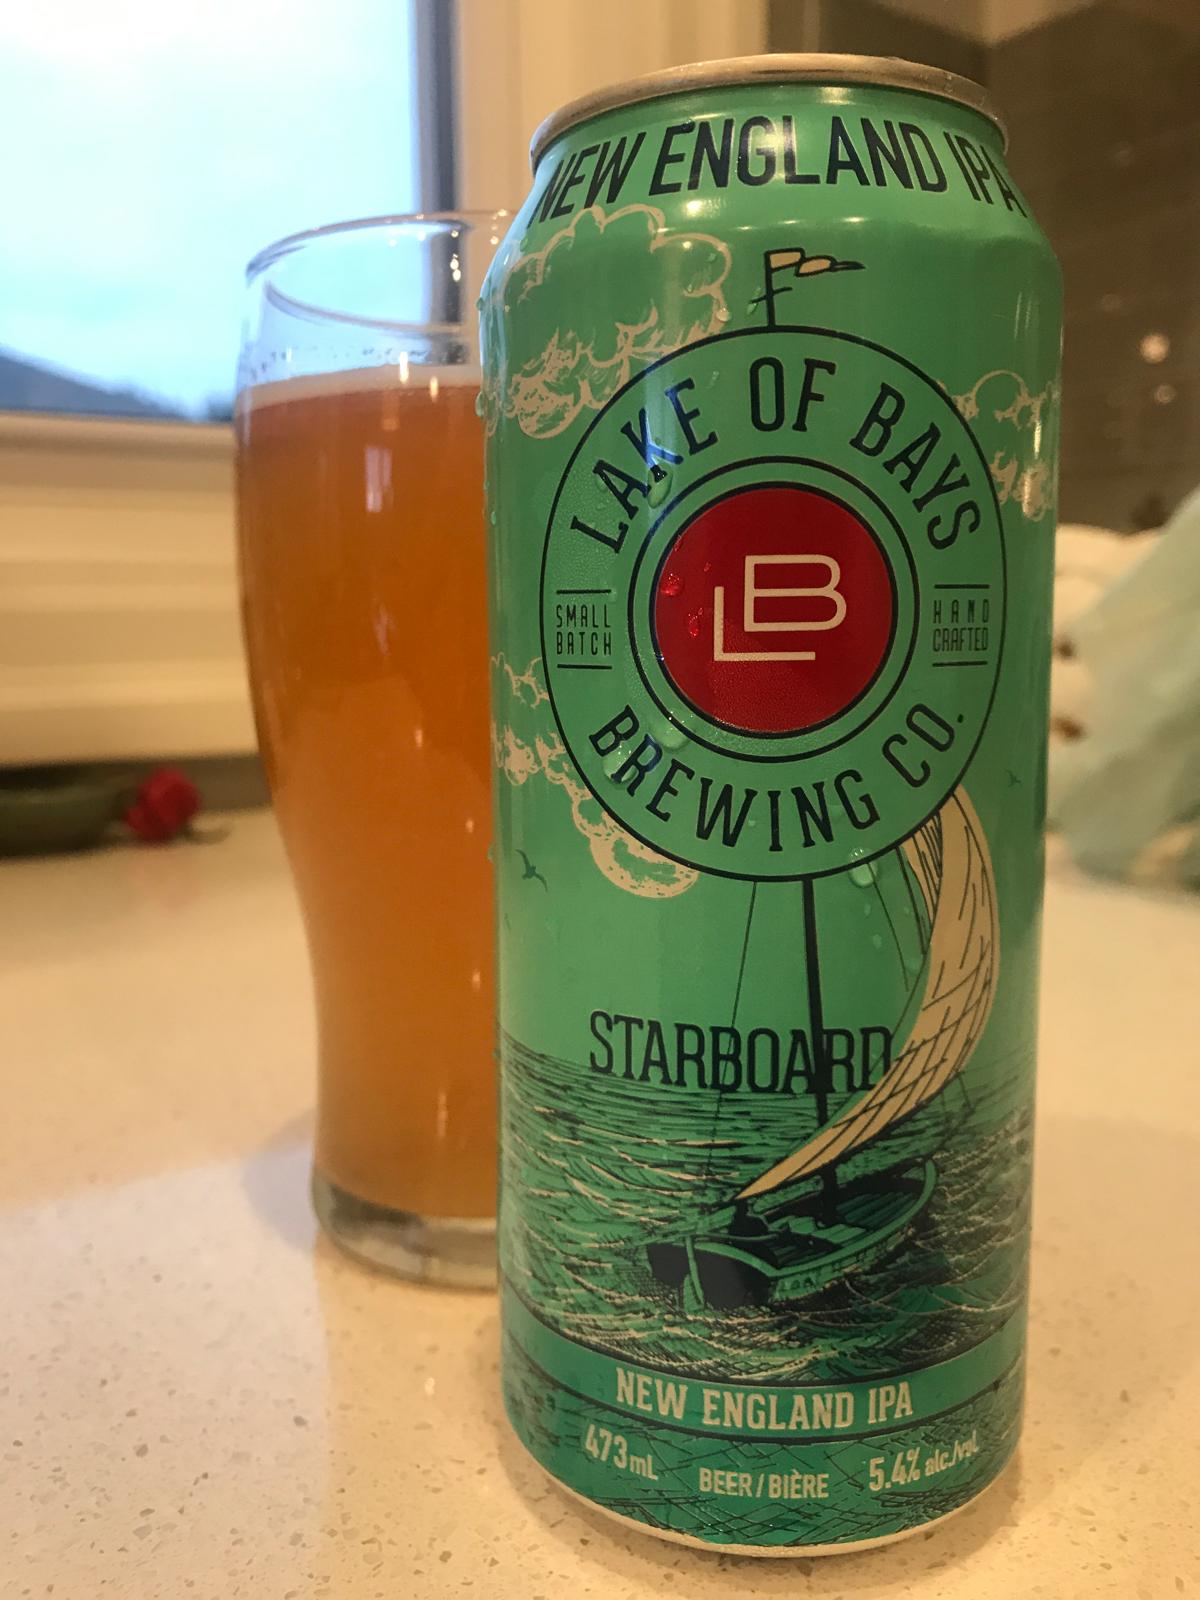 Starboard New England IPA